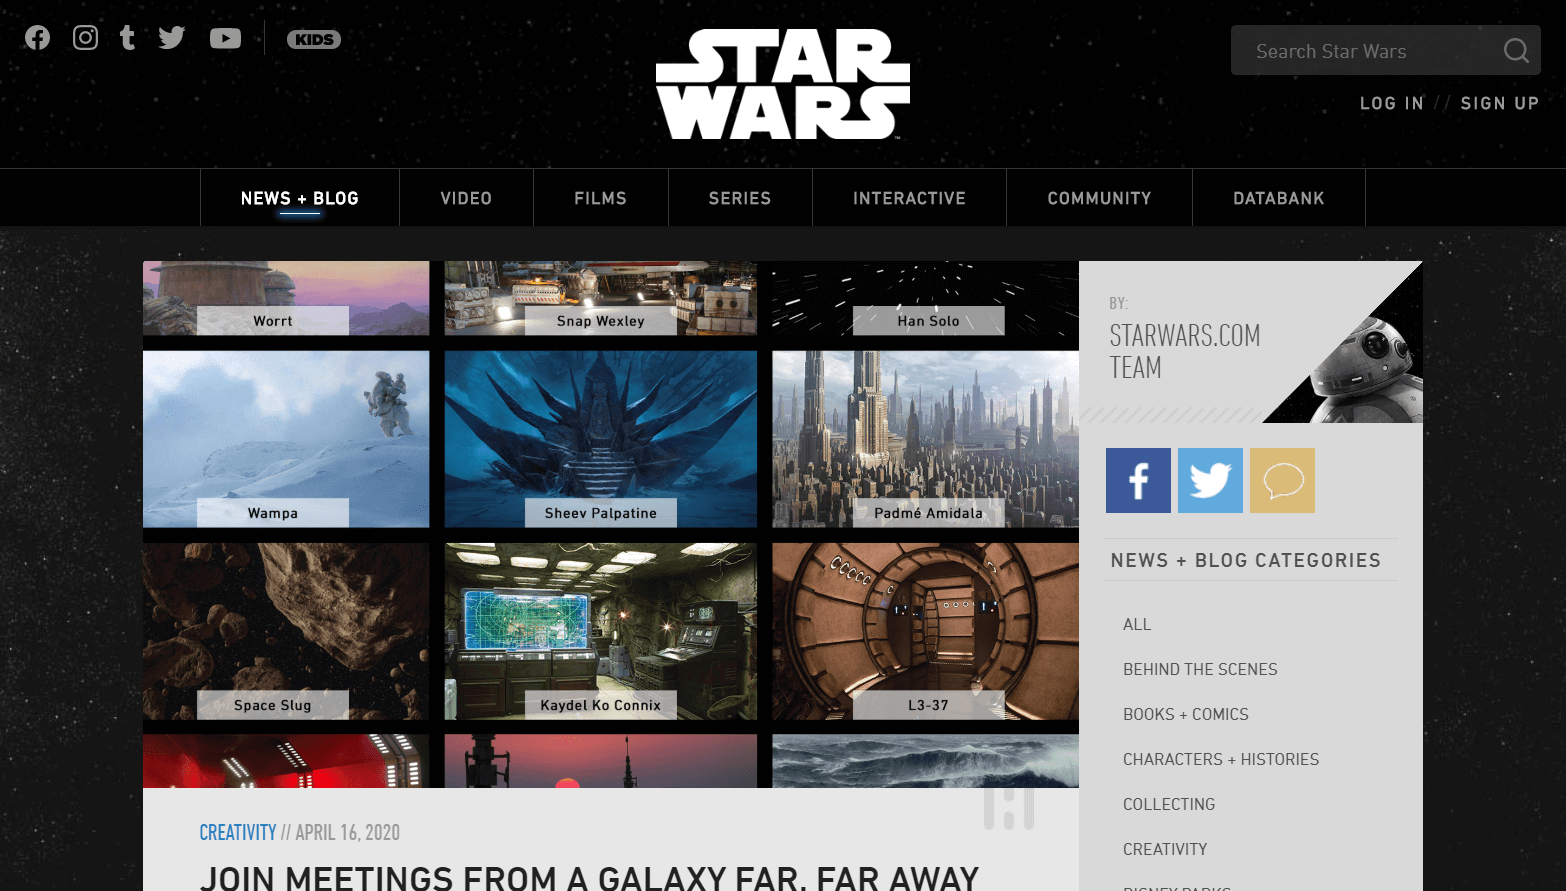 Star Wars Backgrounds for Video Calls & Meetings | StarWars.com